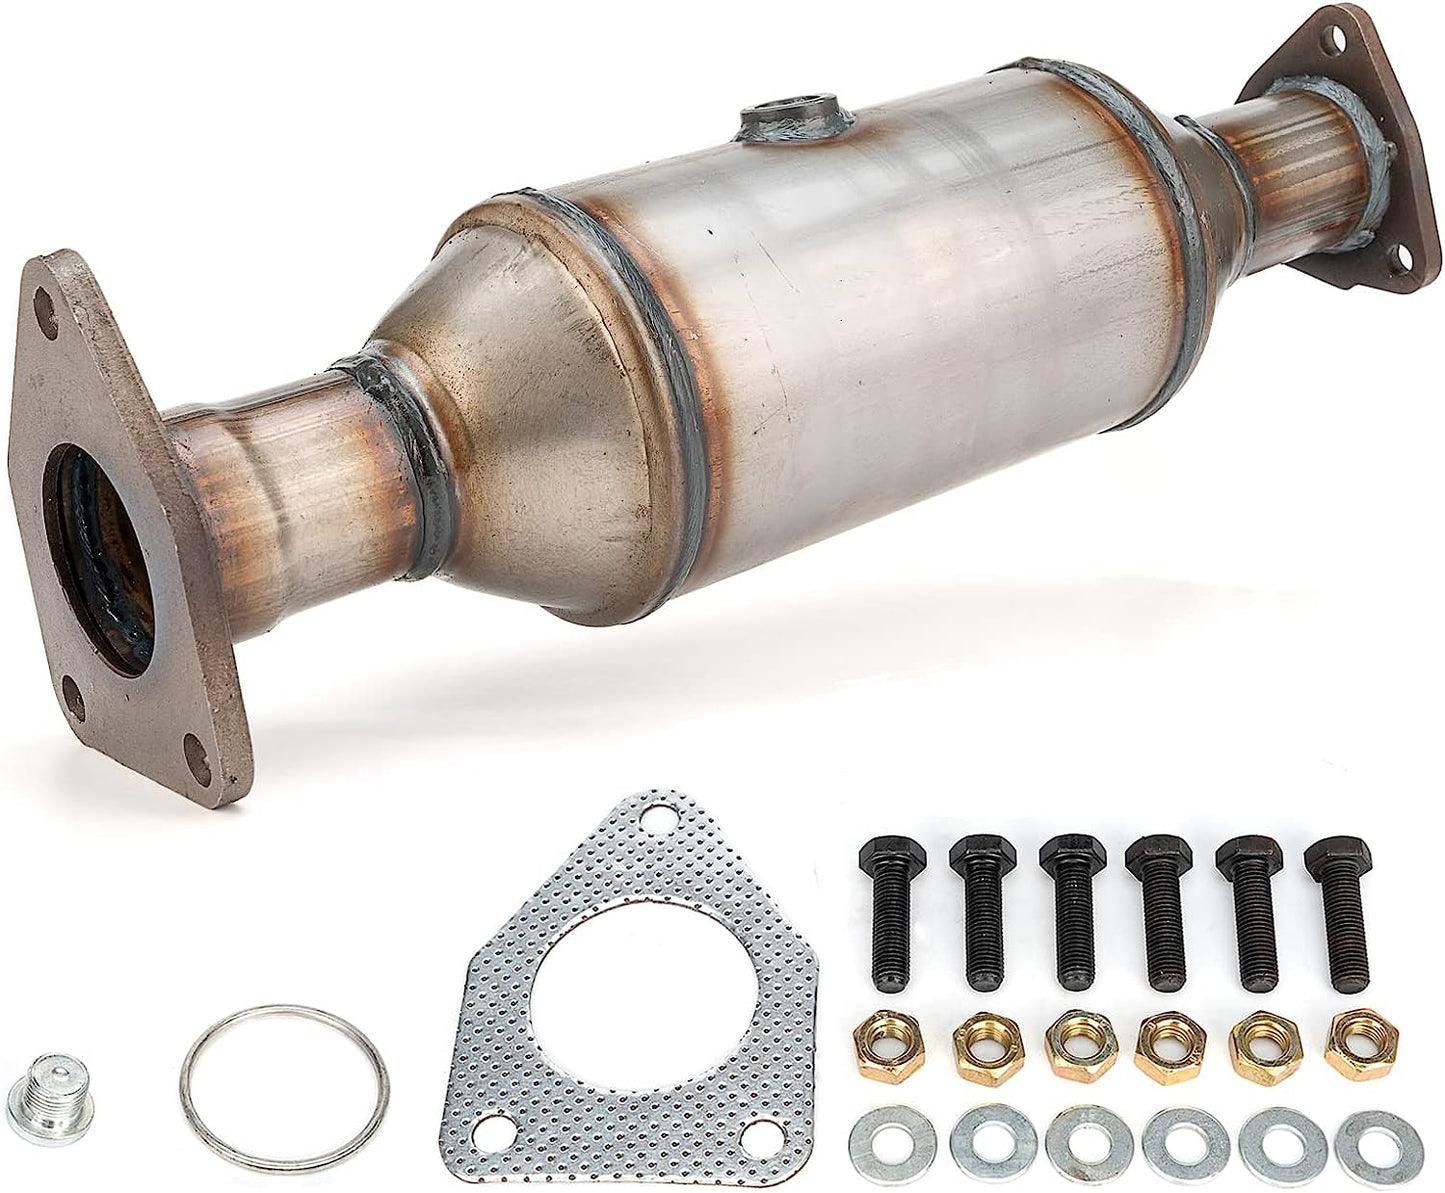 FOMIUZY High Flow Front Catalytic Converter Kit Direct-Fit Honda Odyssey 1999 2000 2001 2002 2003 2004 3.5L Accord 1998-2002 3.0L Acura TL 1999-2003 3.2L Acura CL 2001-2003 3.2L